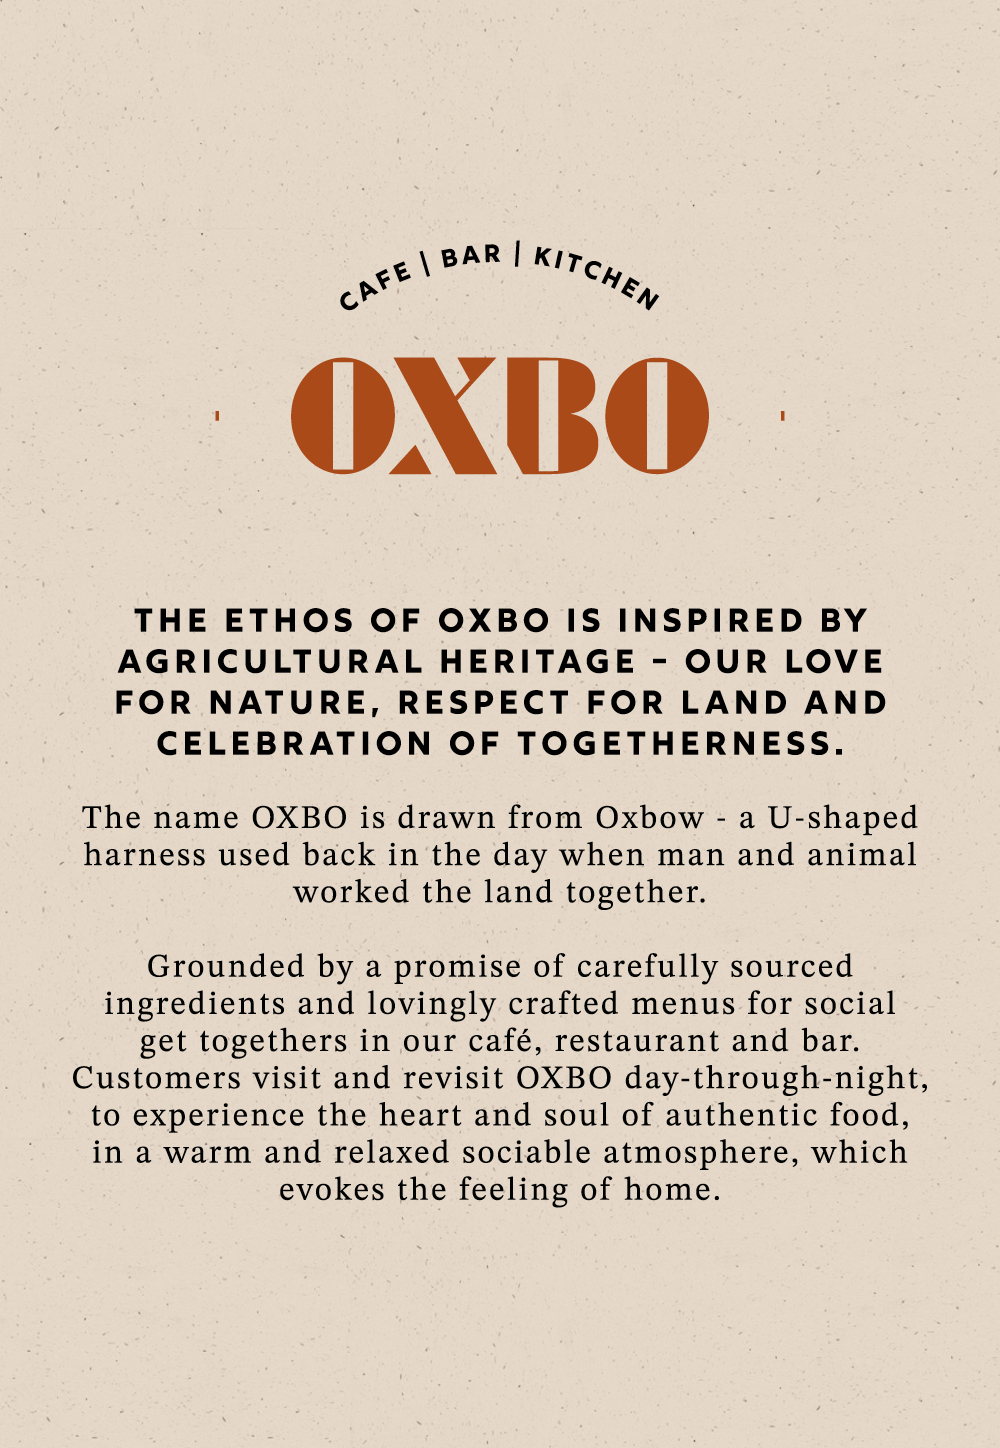 oxbo reading, mission statement